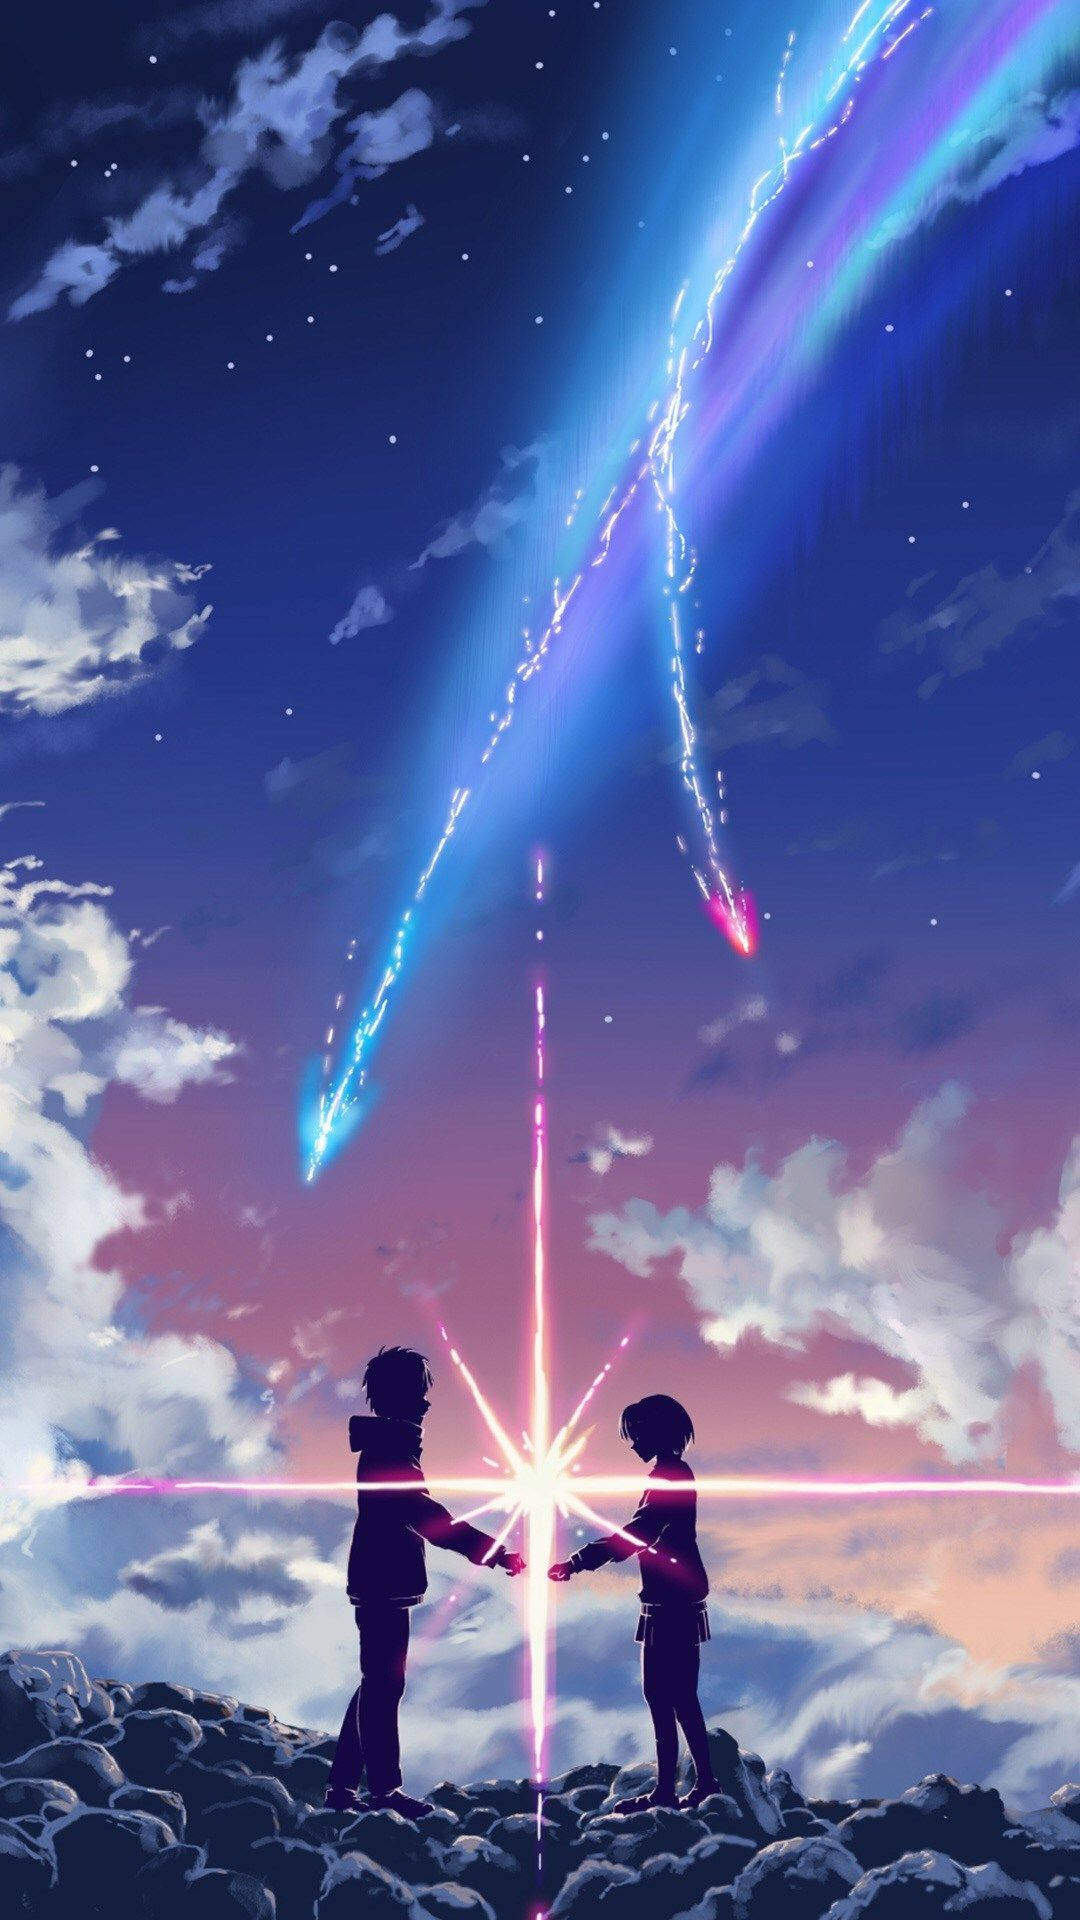 "Silhouette of Your Name Dreams Among the Stars" Wallpaper